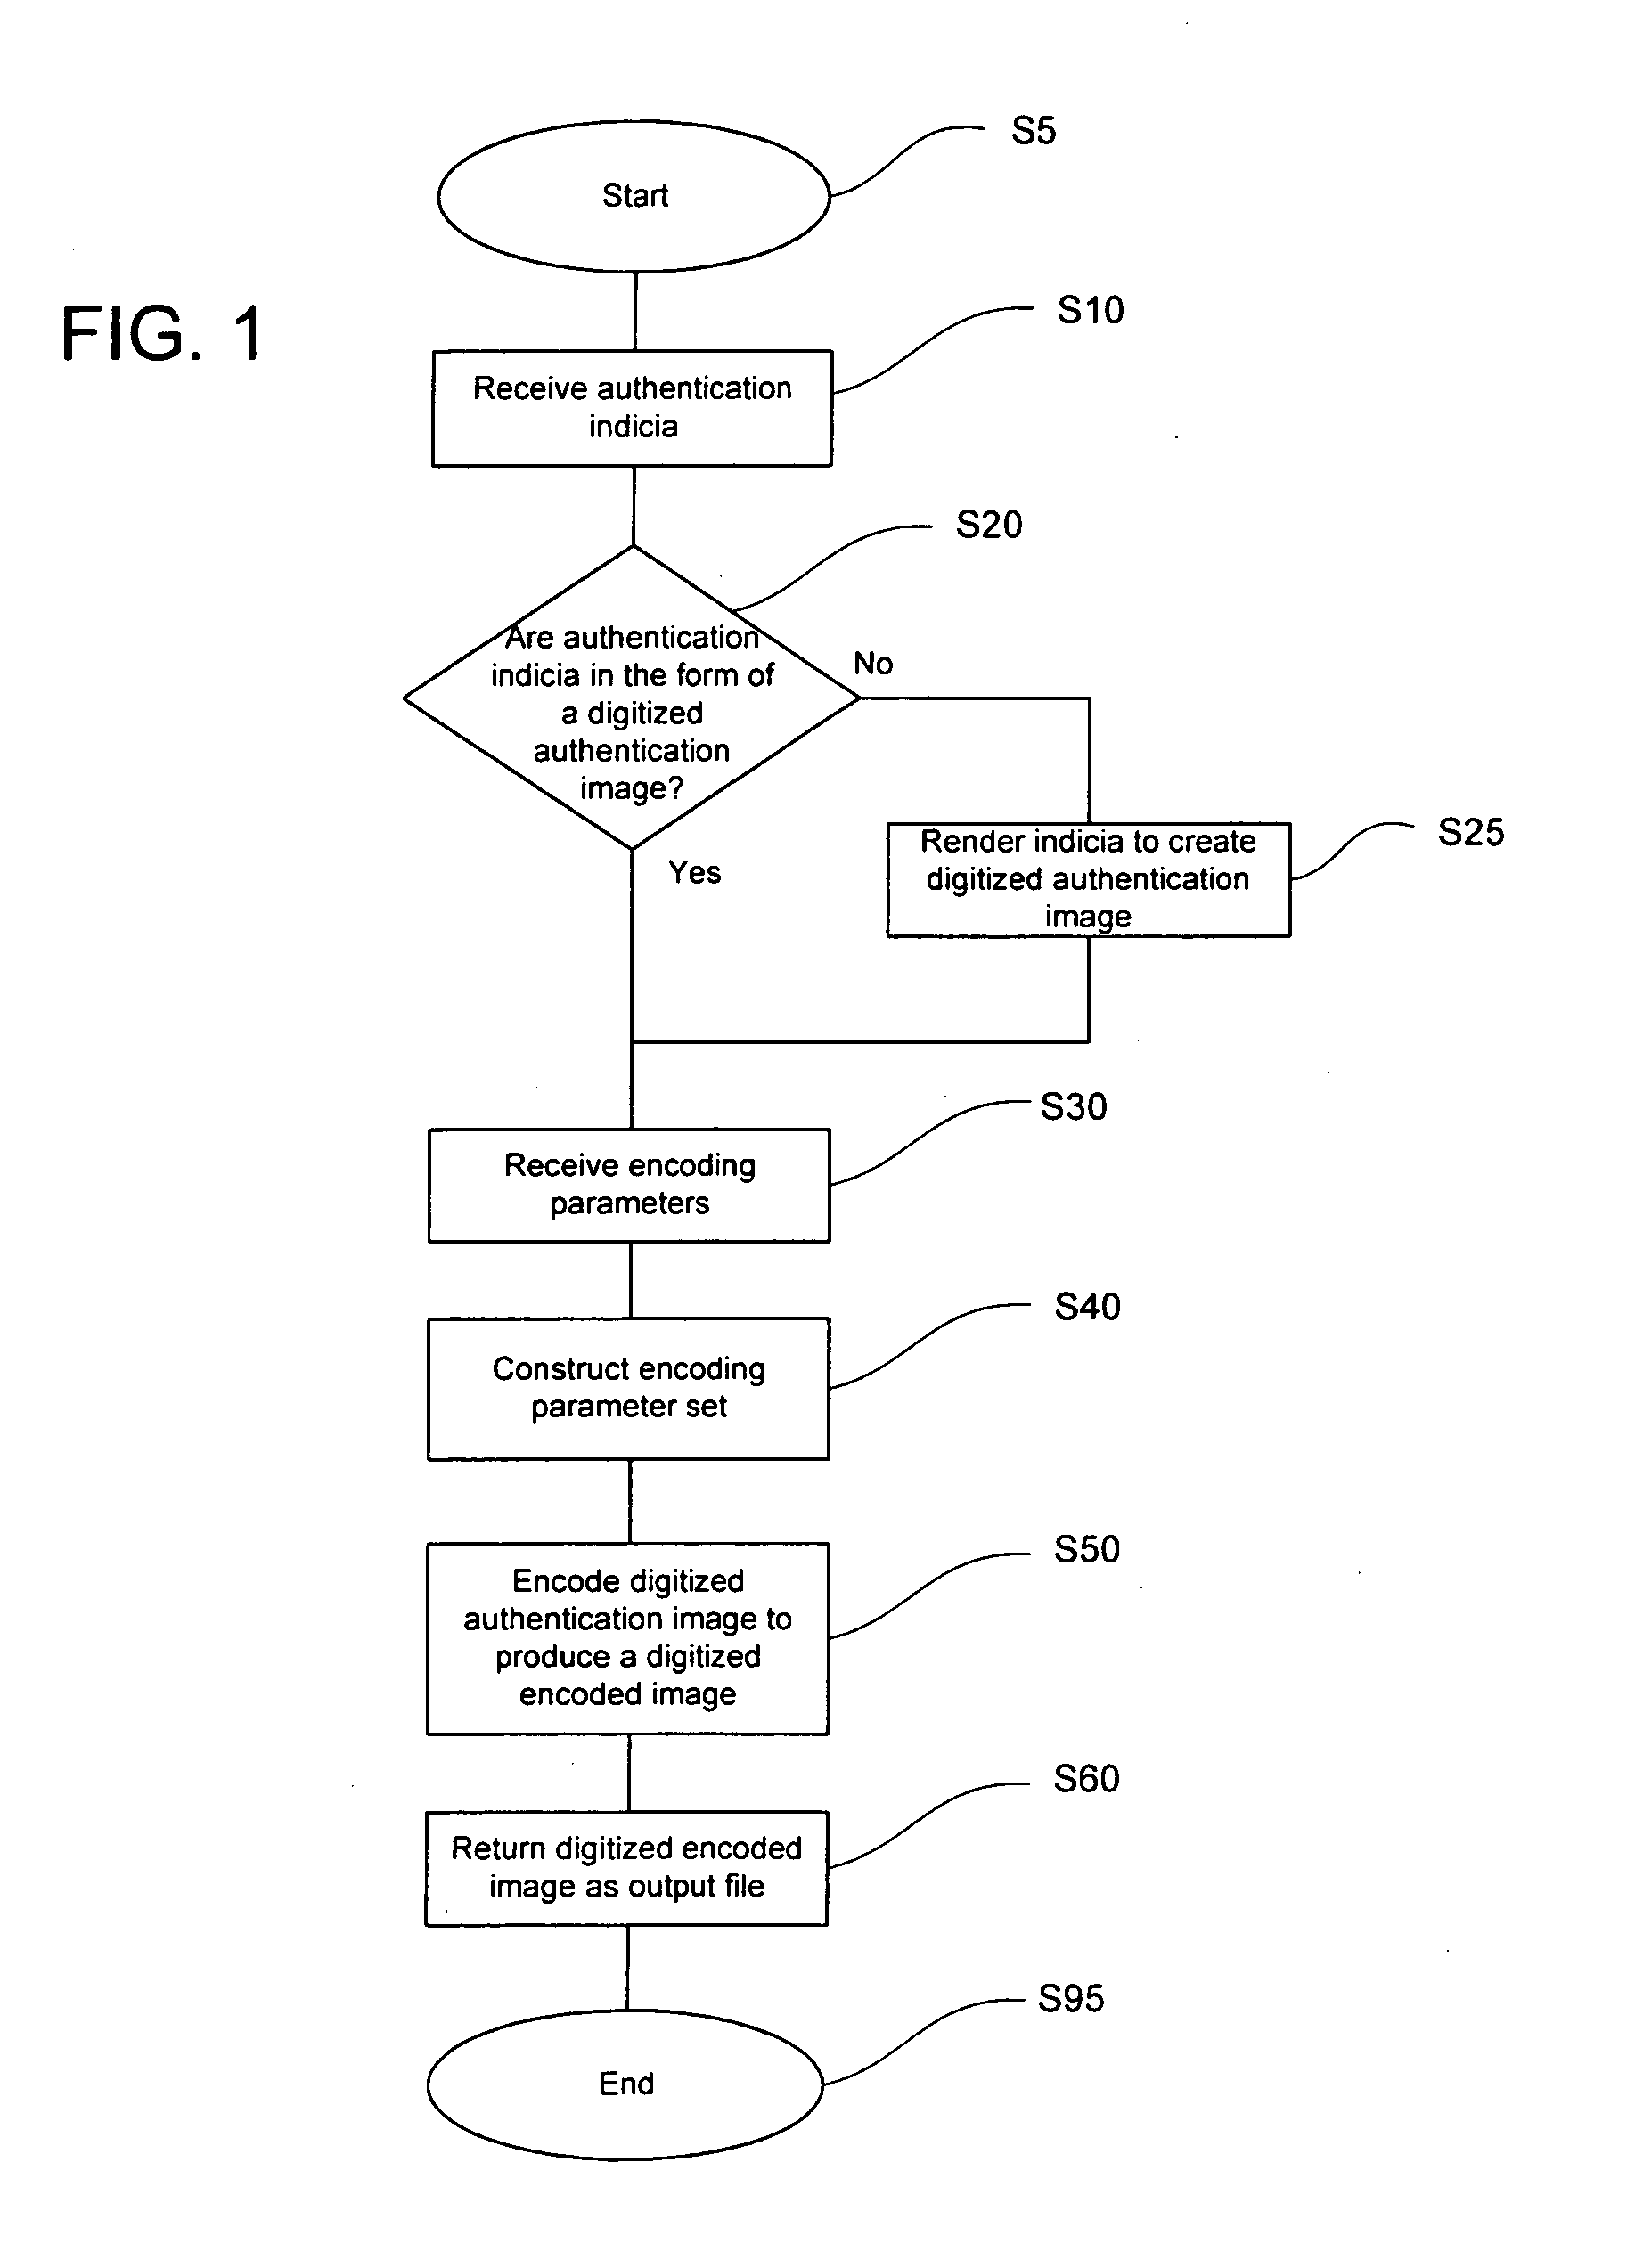 Method and system for controlling encoded image production